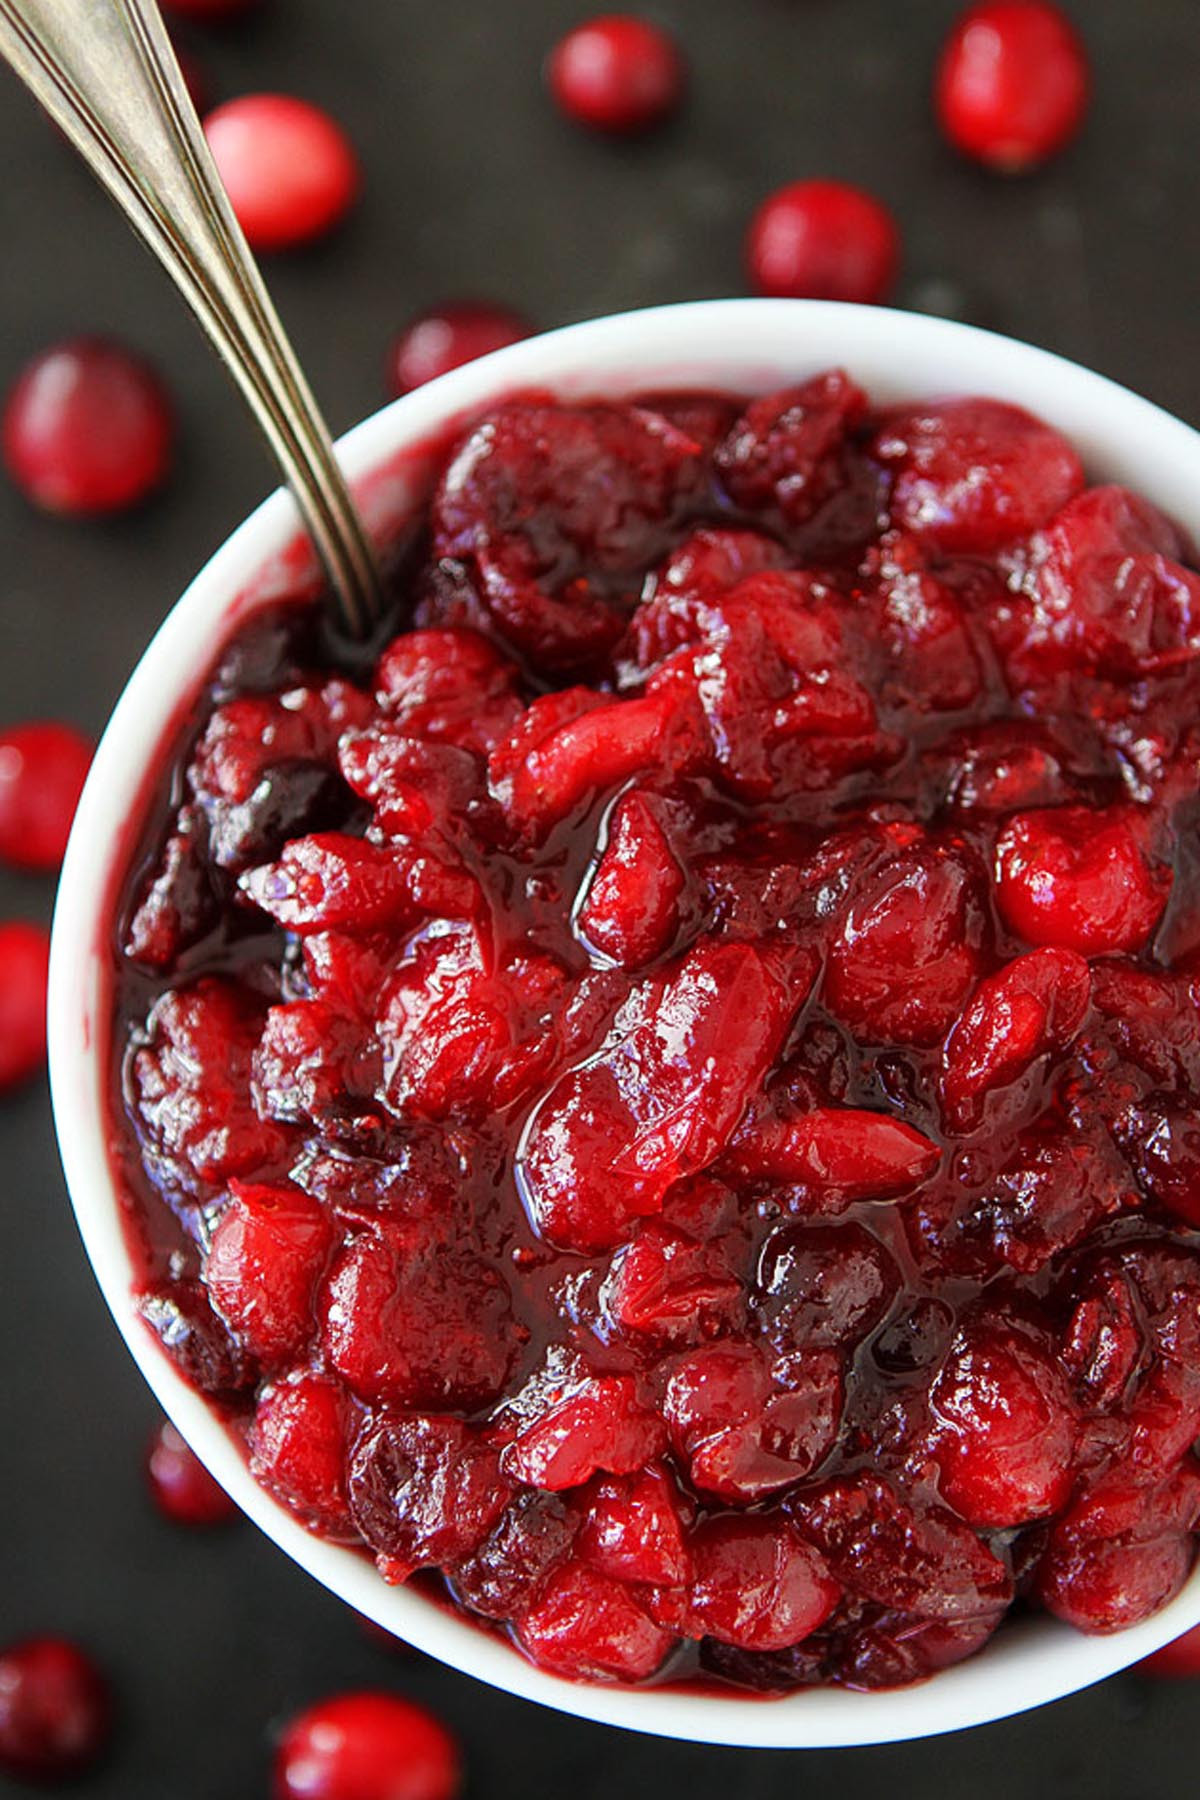 Cranberry Recipes For Thanksgiving
 13 Easy Cranberry Sauce Recipes for Thanksgiving How to